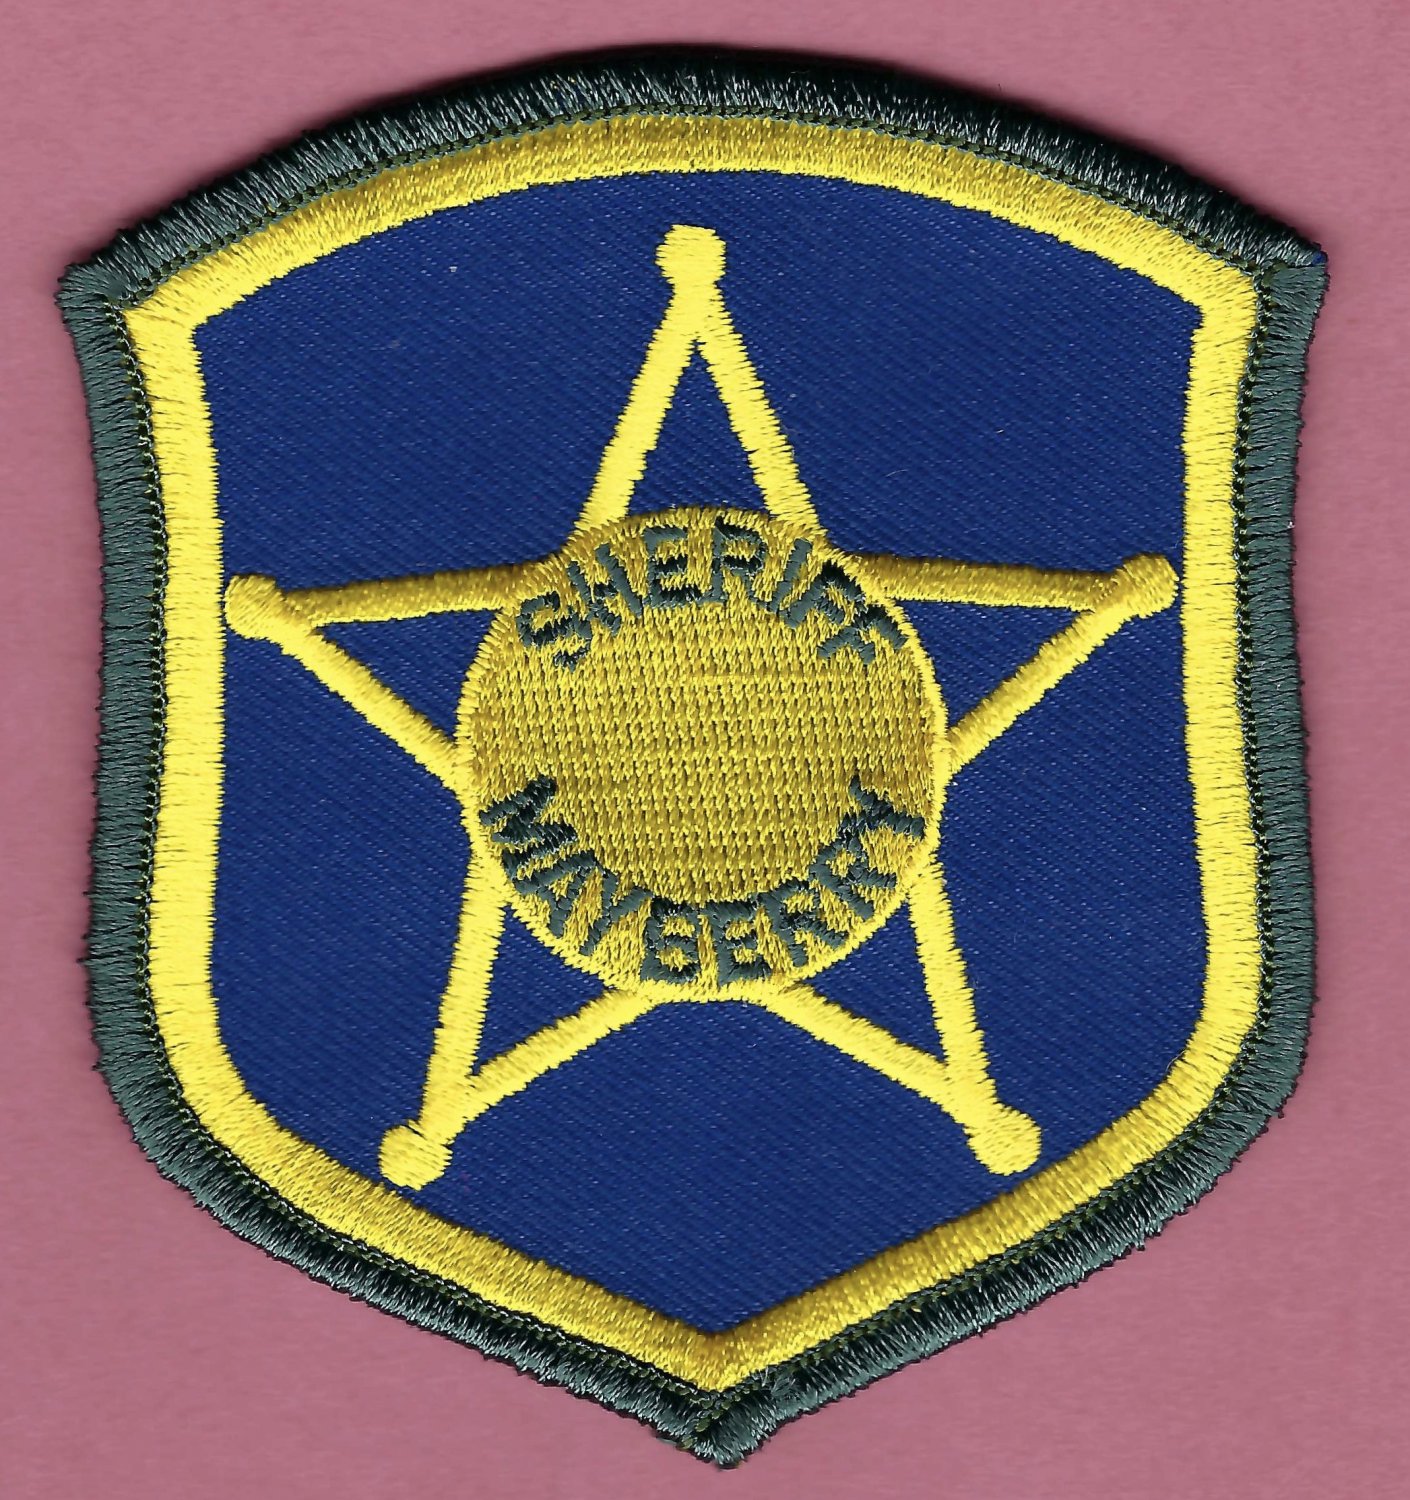 Mayberry Sheriff Patch from the Andy Griffith Show